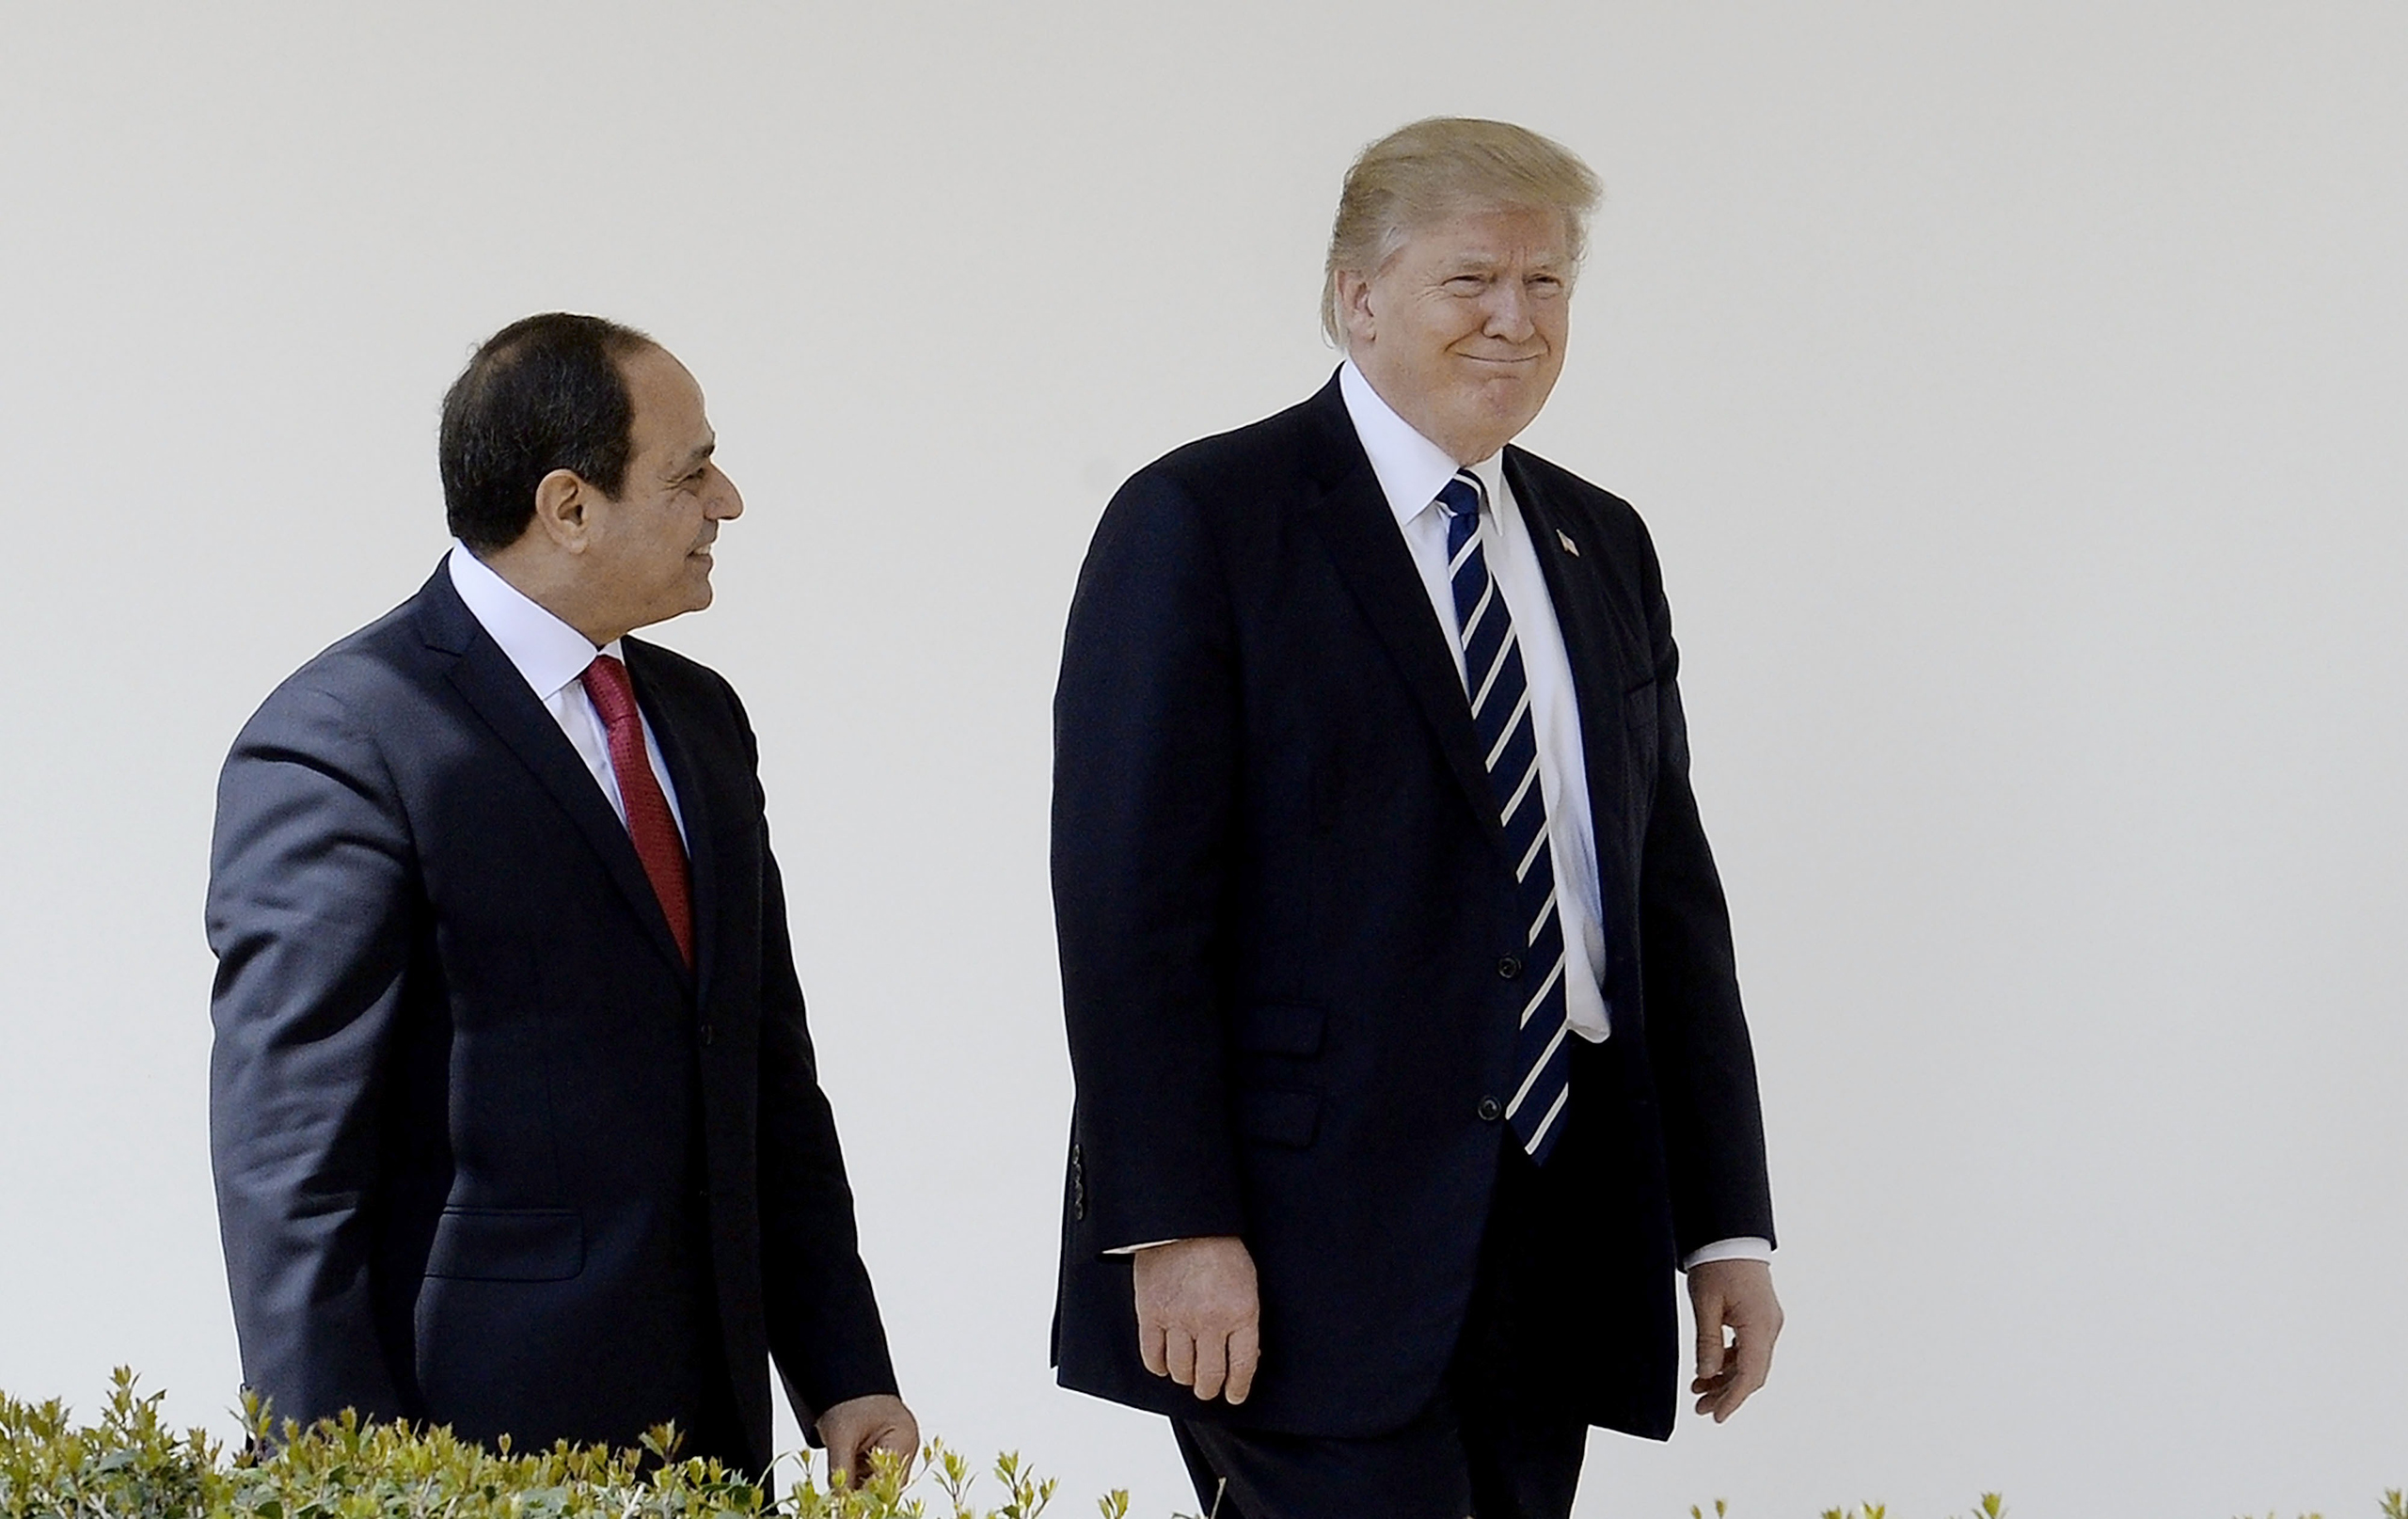 President Donald Trump and Egypt President Abdel Fattah Al Sisi leave the Oval Office of The White House on April 3, 2017 in Washington, D.C. (Olivier Douliery—Getty Images)